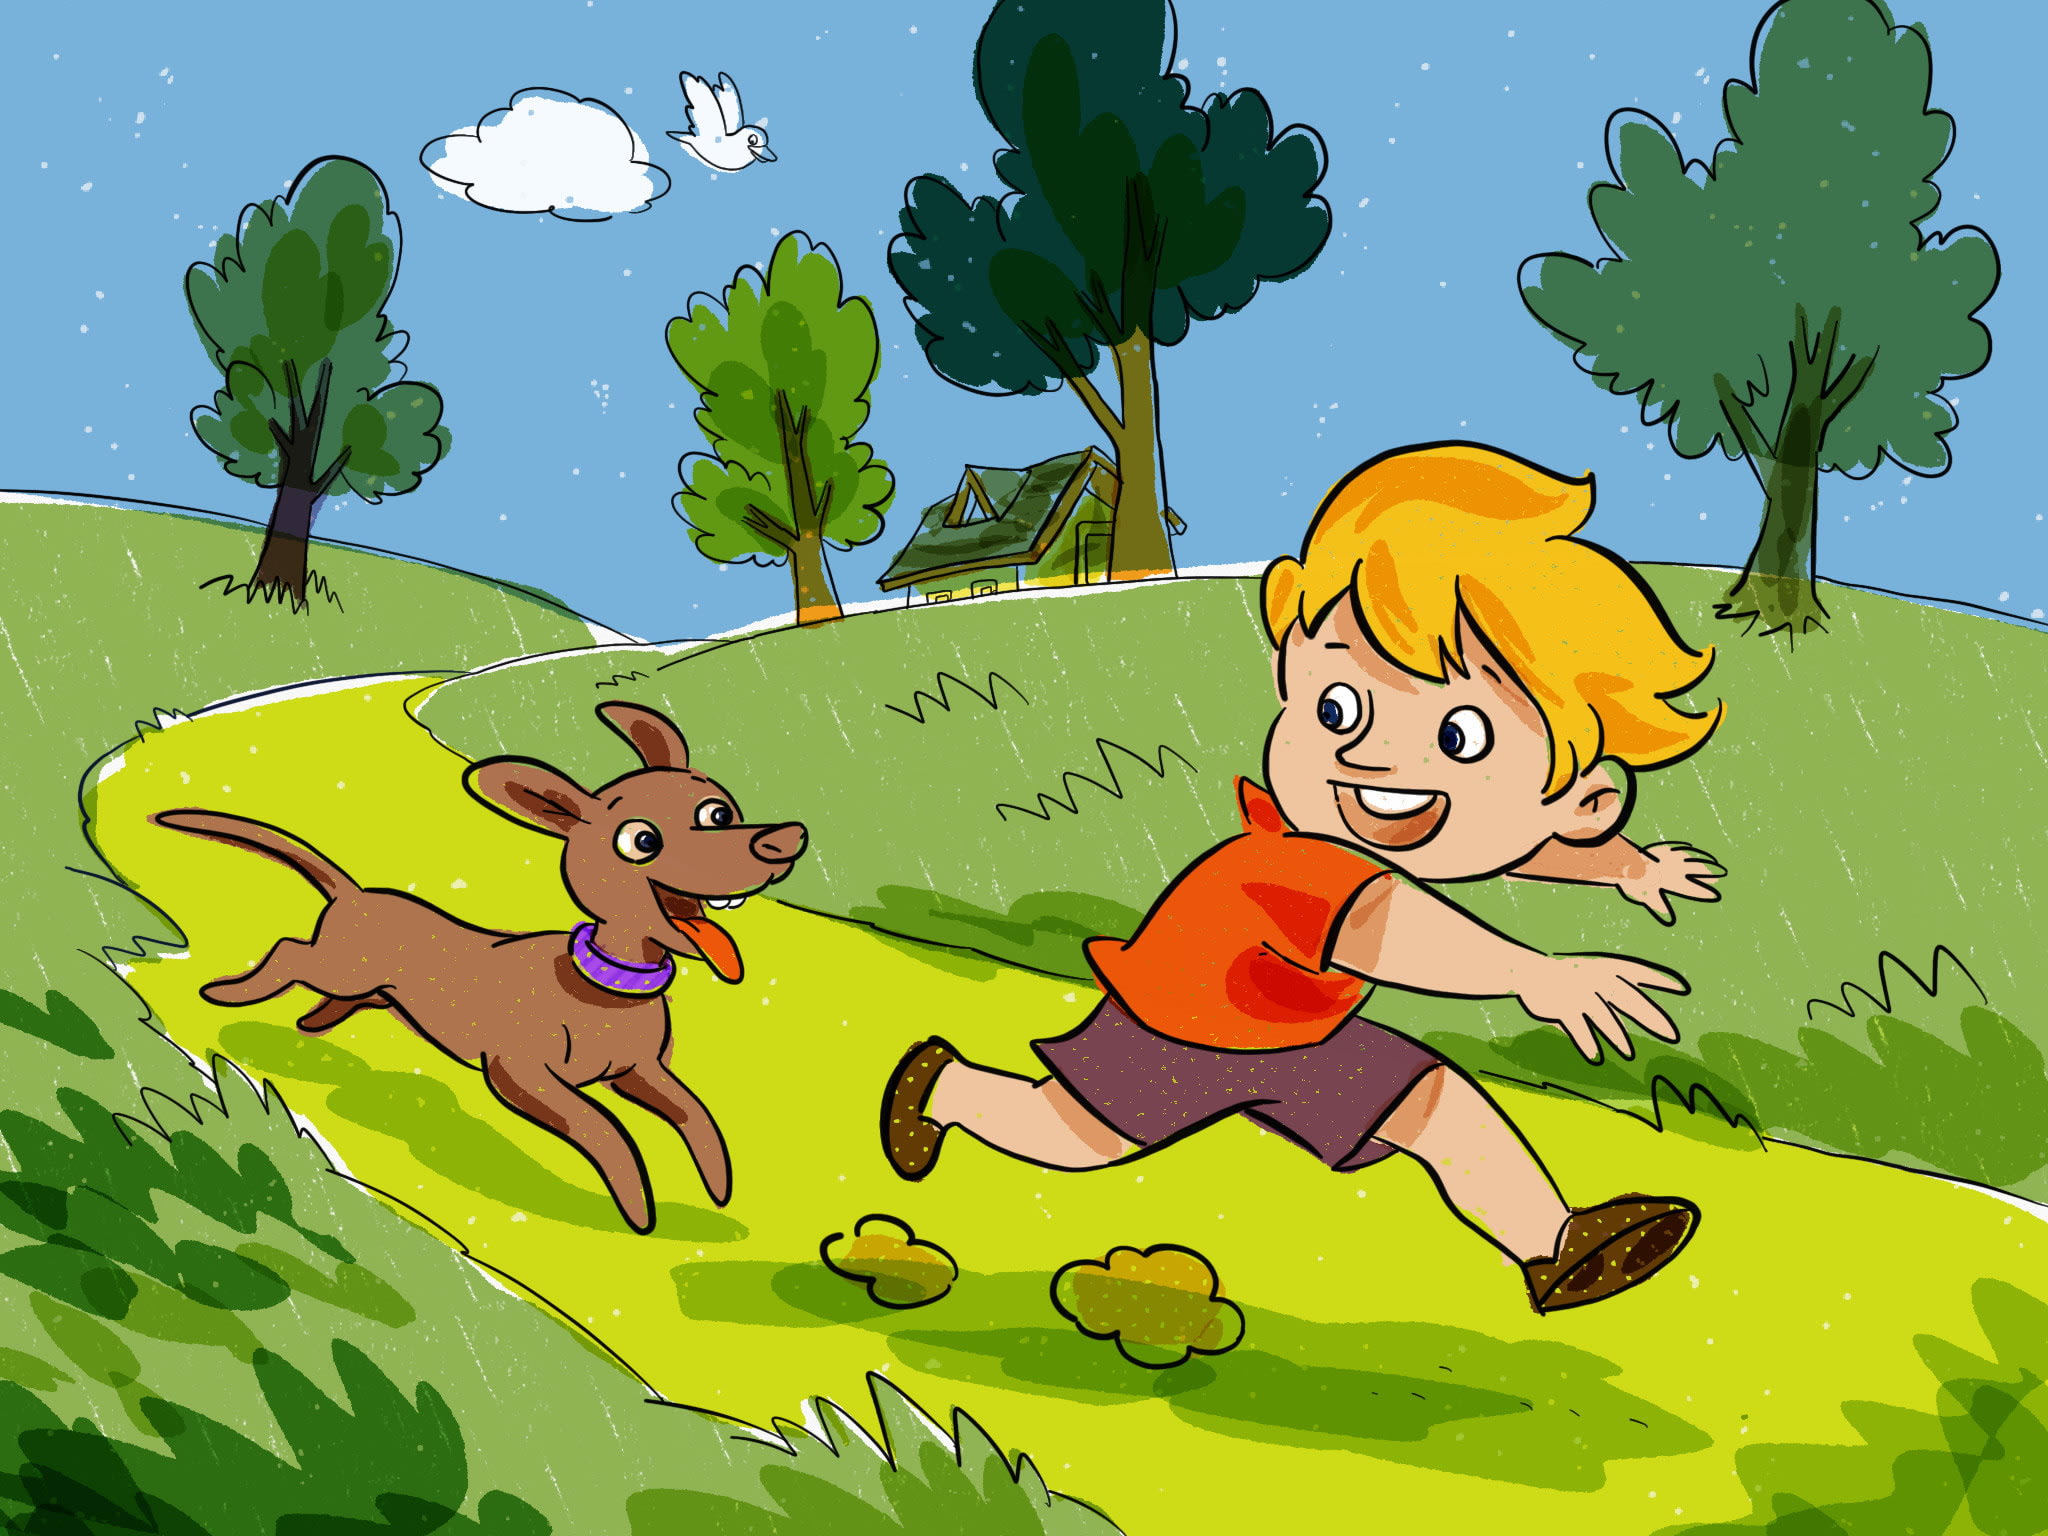 Draw amazing kids book illustration or cartoon for amazon kindle by  Honeybooks | Fiverr